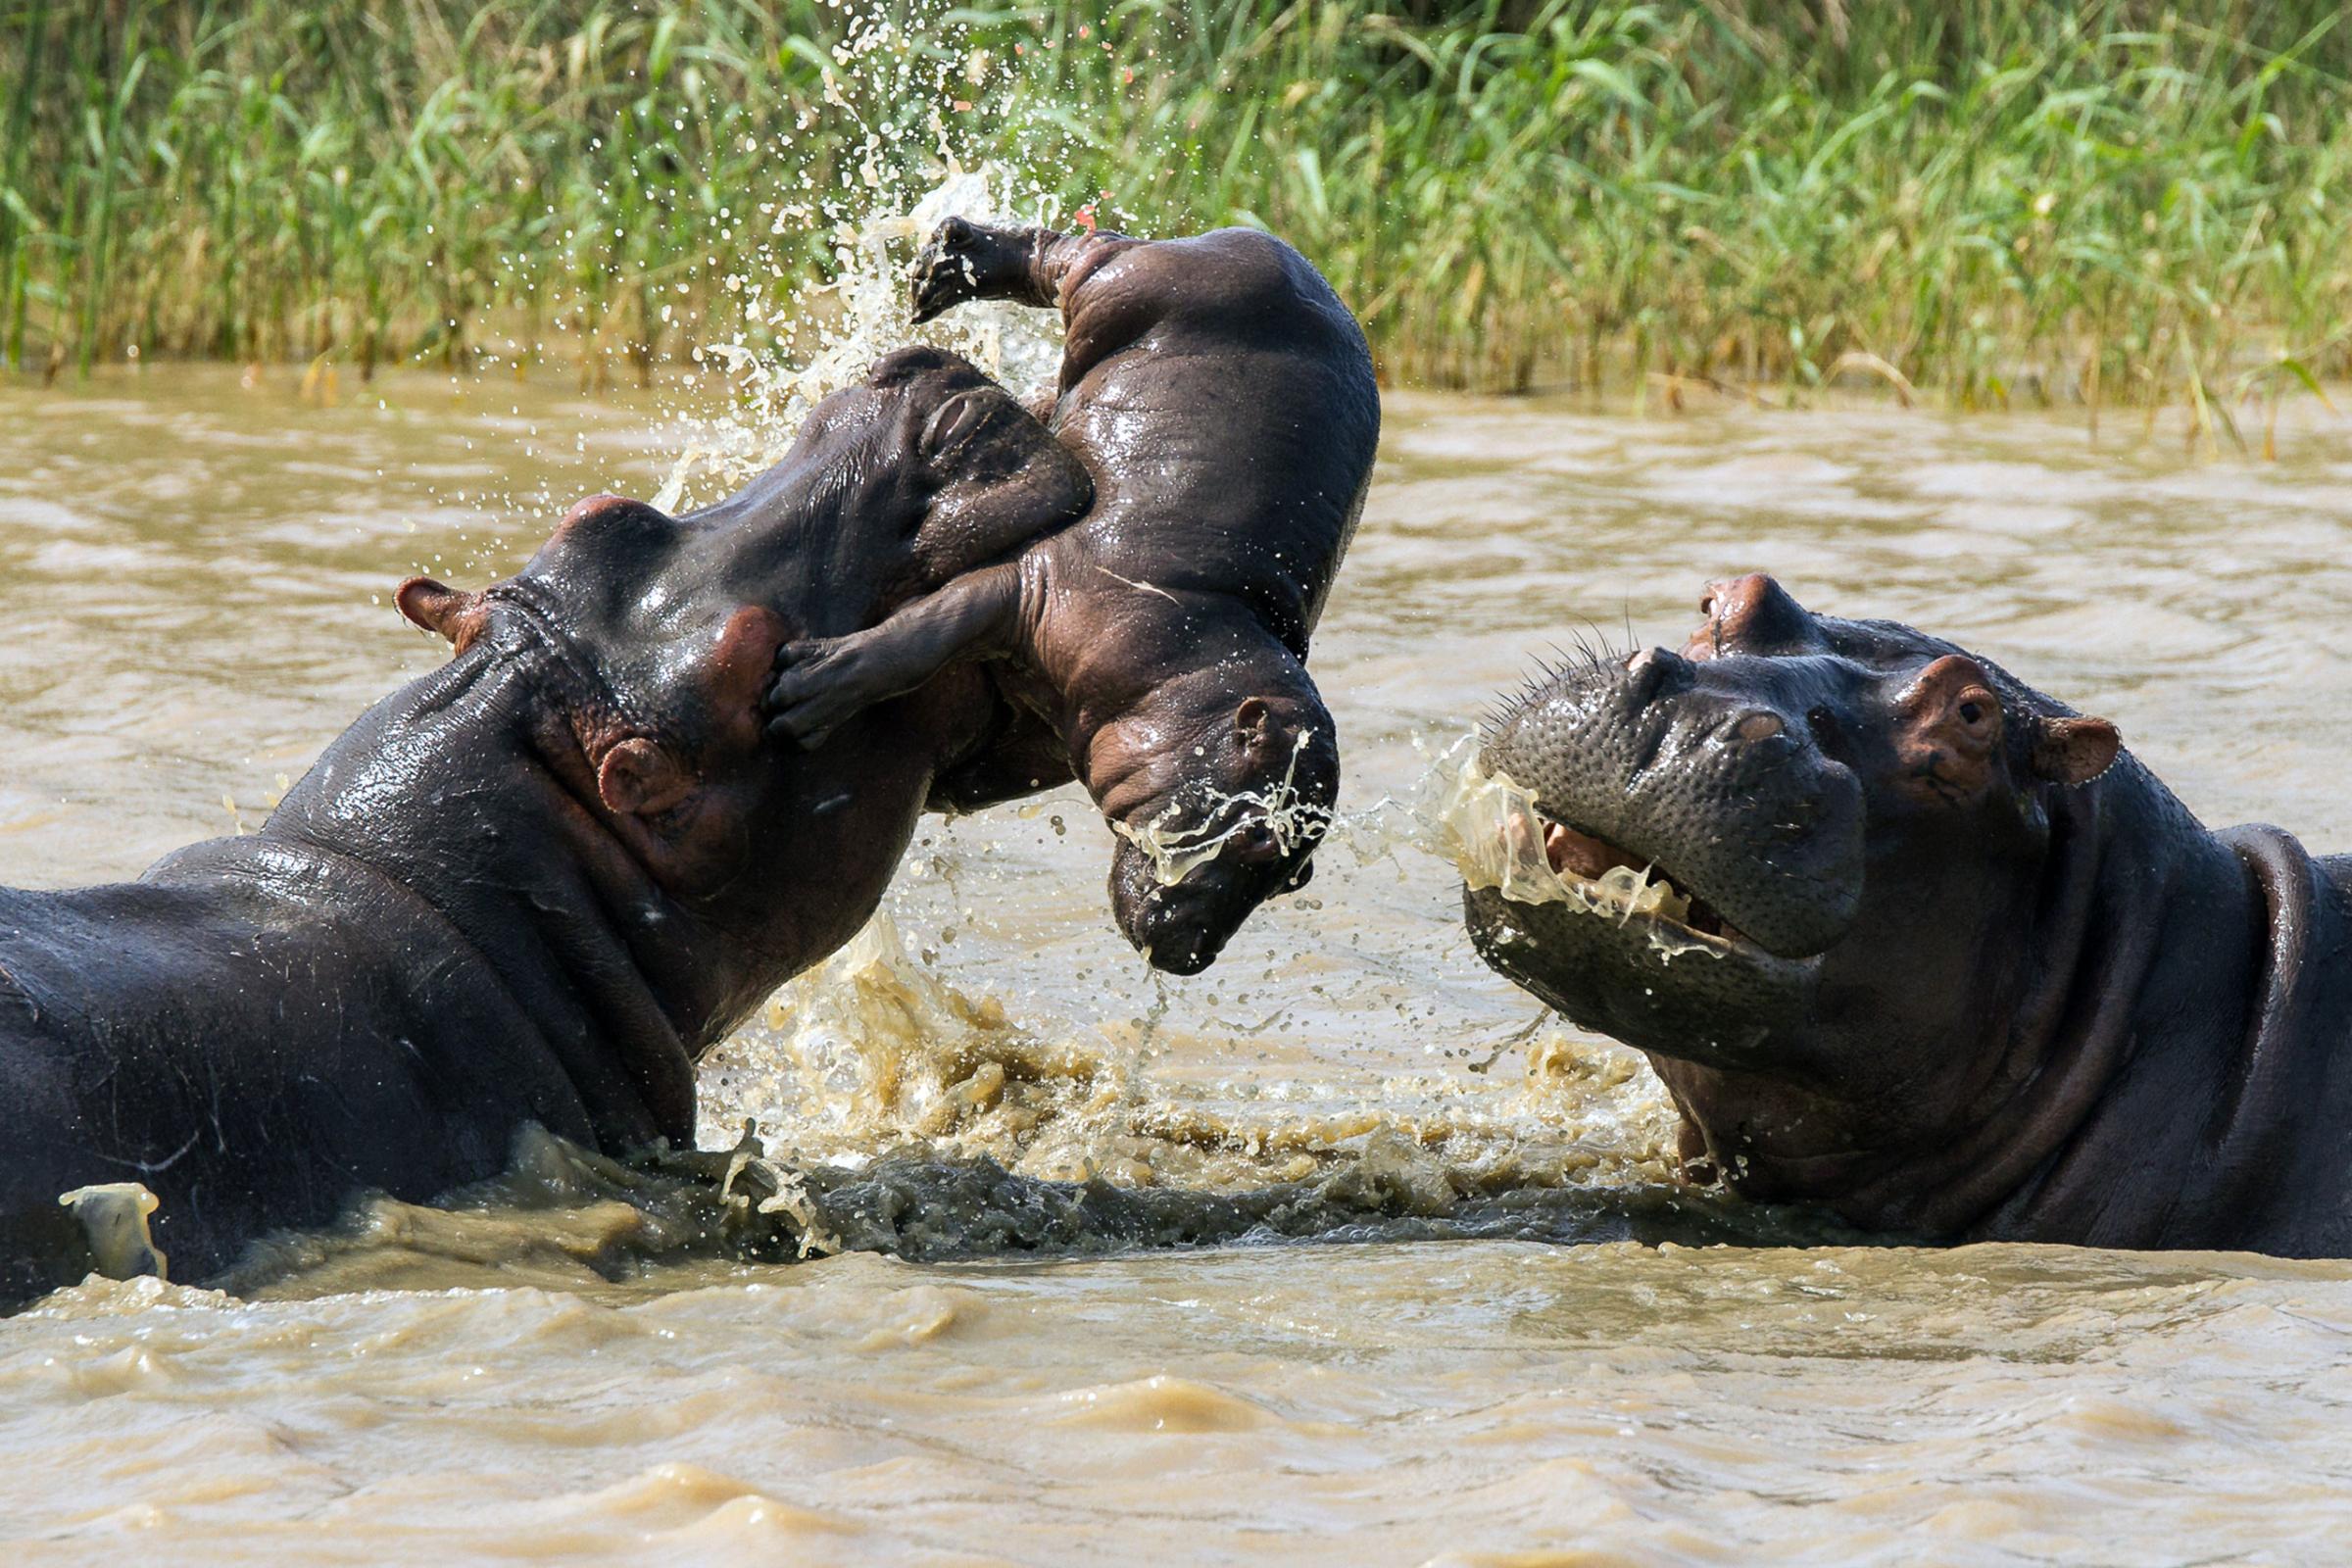 BABY HIPPO TOSSED IN THE AIR BY ADULT